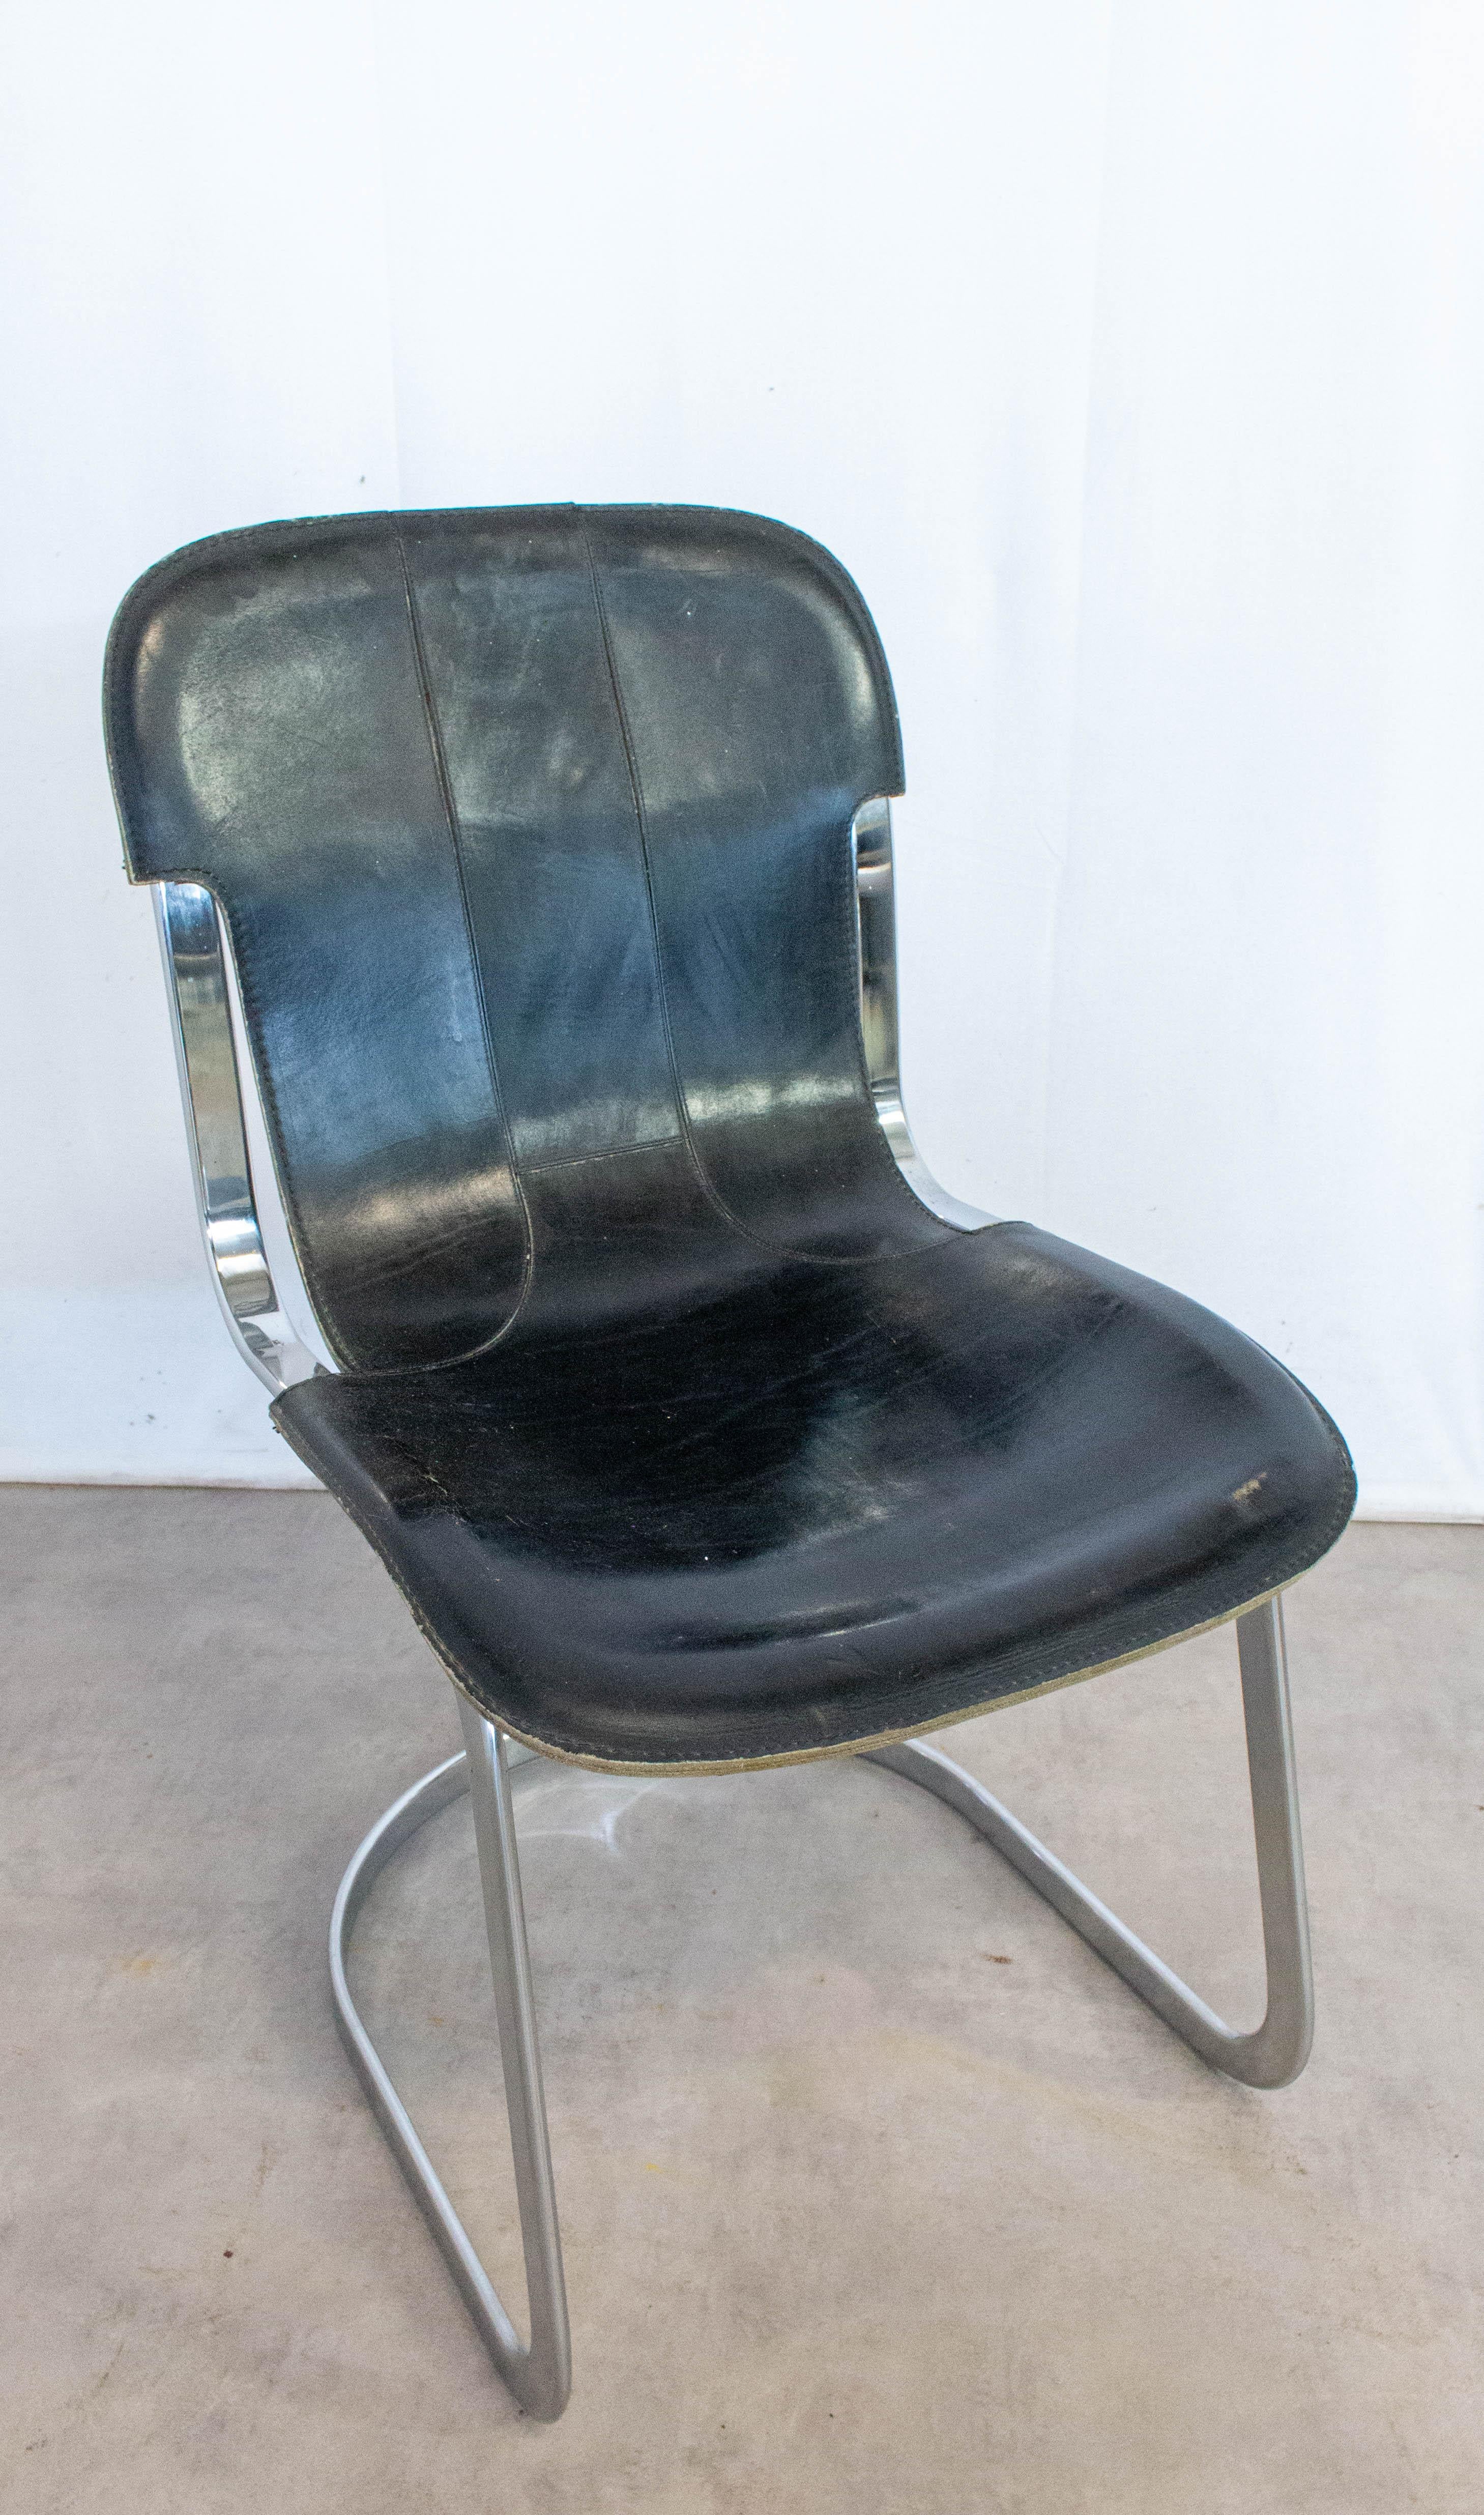 Black leather and chrome Willy Rizzo chair, circa 1970s
Also available in our store and on 1st Dibs: Chair Willy Rizzo Black Leather Chrome N1 circa 1970 and Chair Willy Rizzo Black Leather Chrome N3 circa 1970
Good vintage condition, very